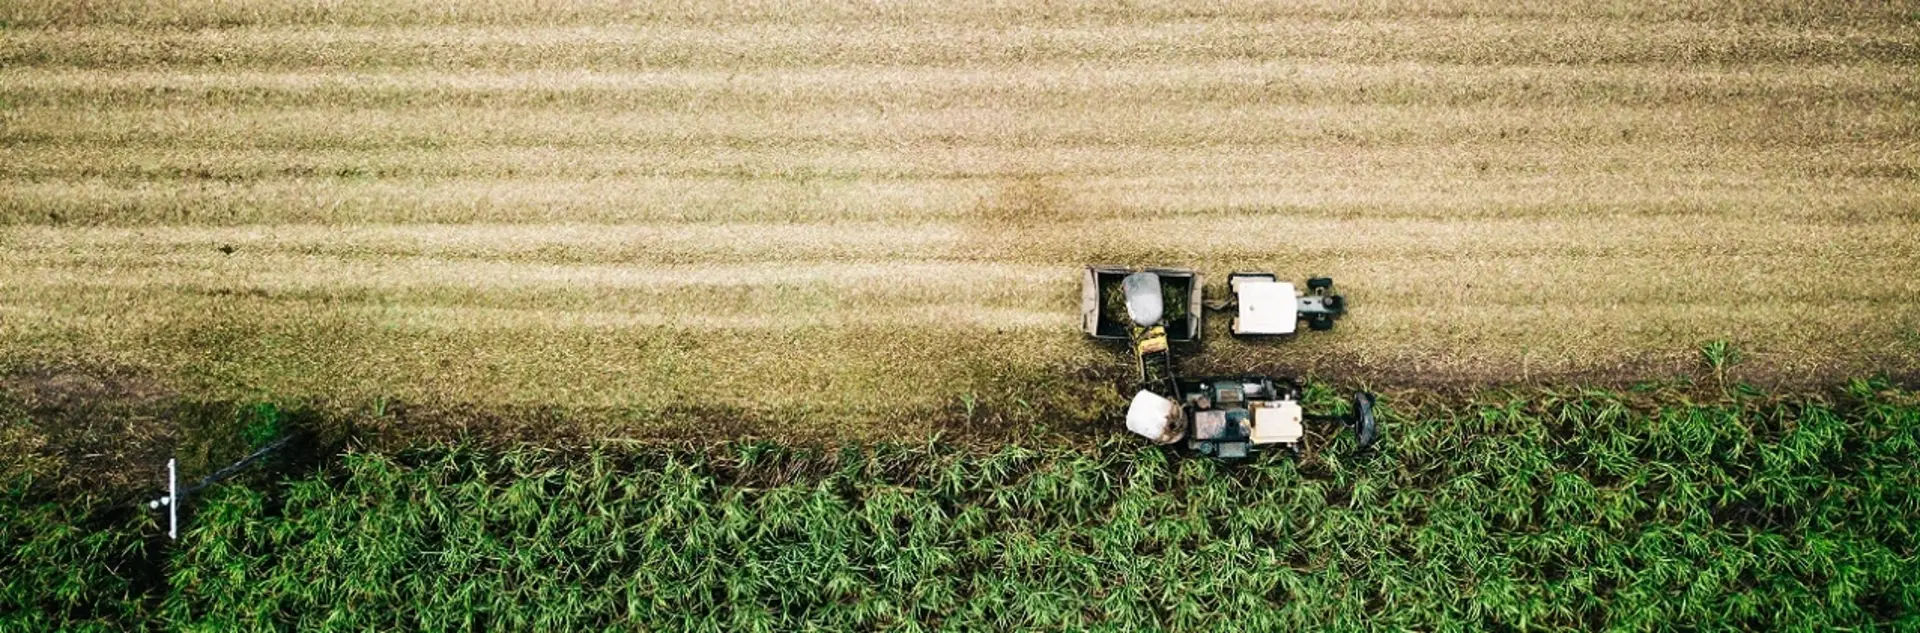 Banner image of a tractor working on a crop